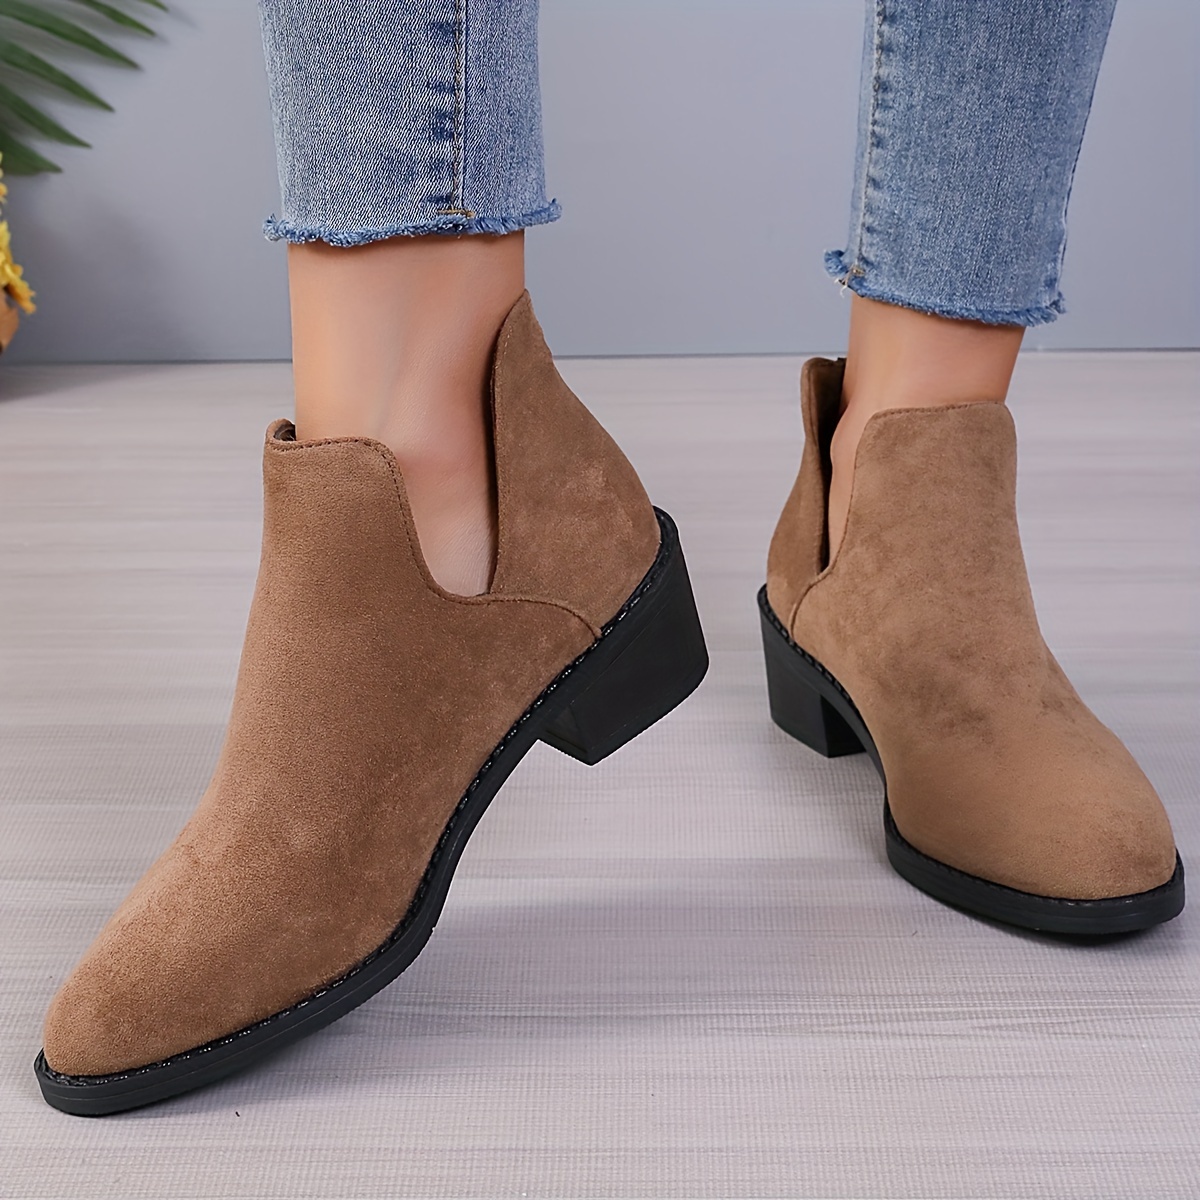 Women's Chunky Heel Short Boots, Causal Cutout Design Solid Color Boots,  Comfortable Ankle Boots